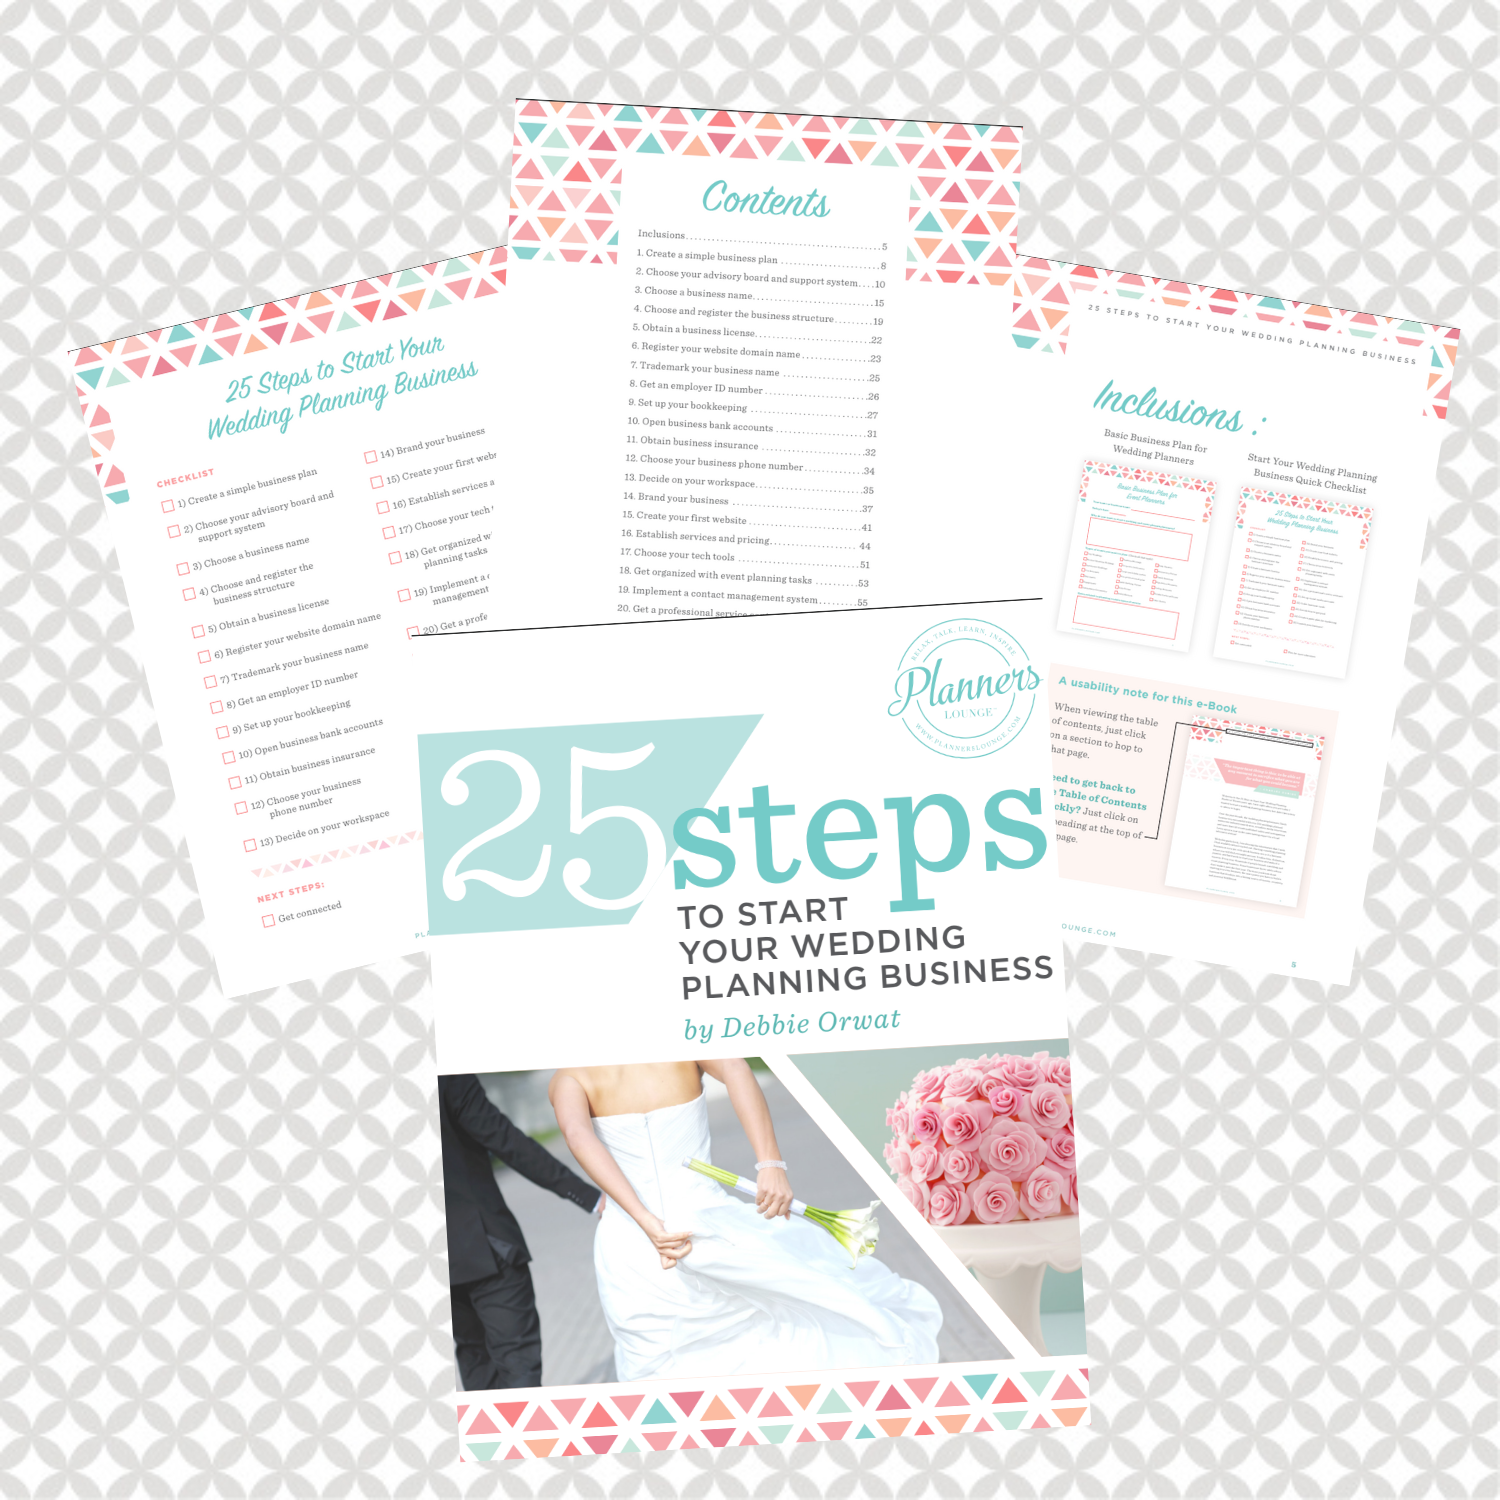 25 Steps to Start Your Wedding Planning Business